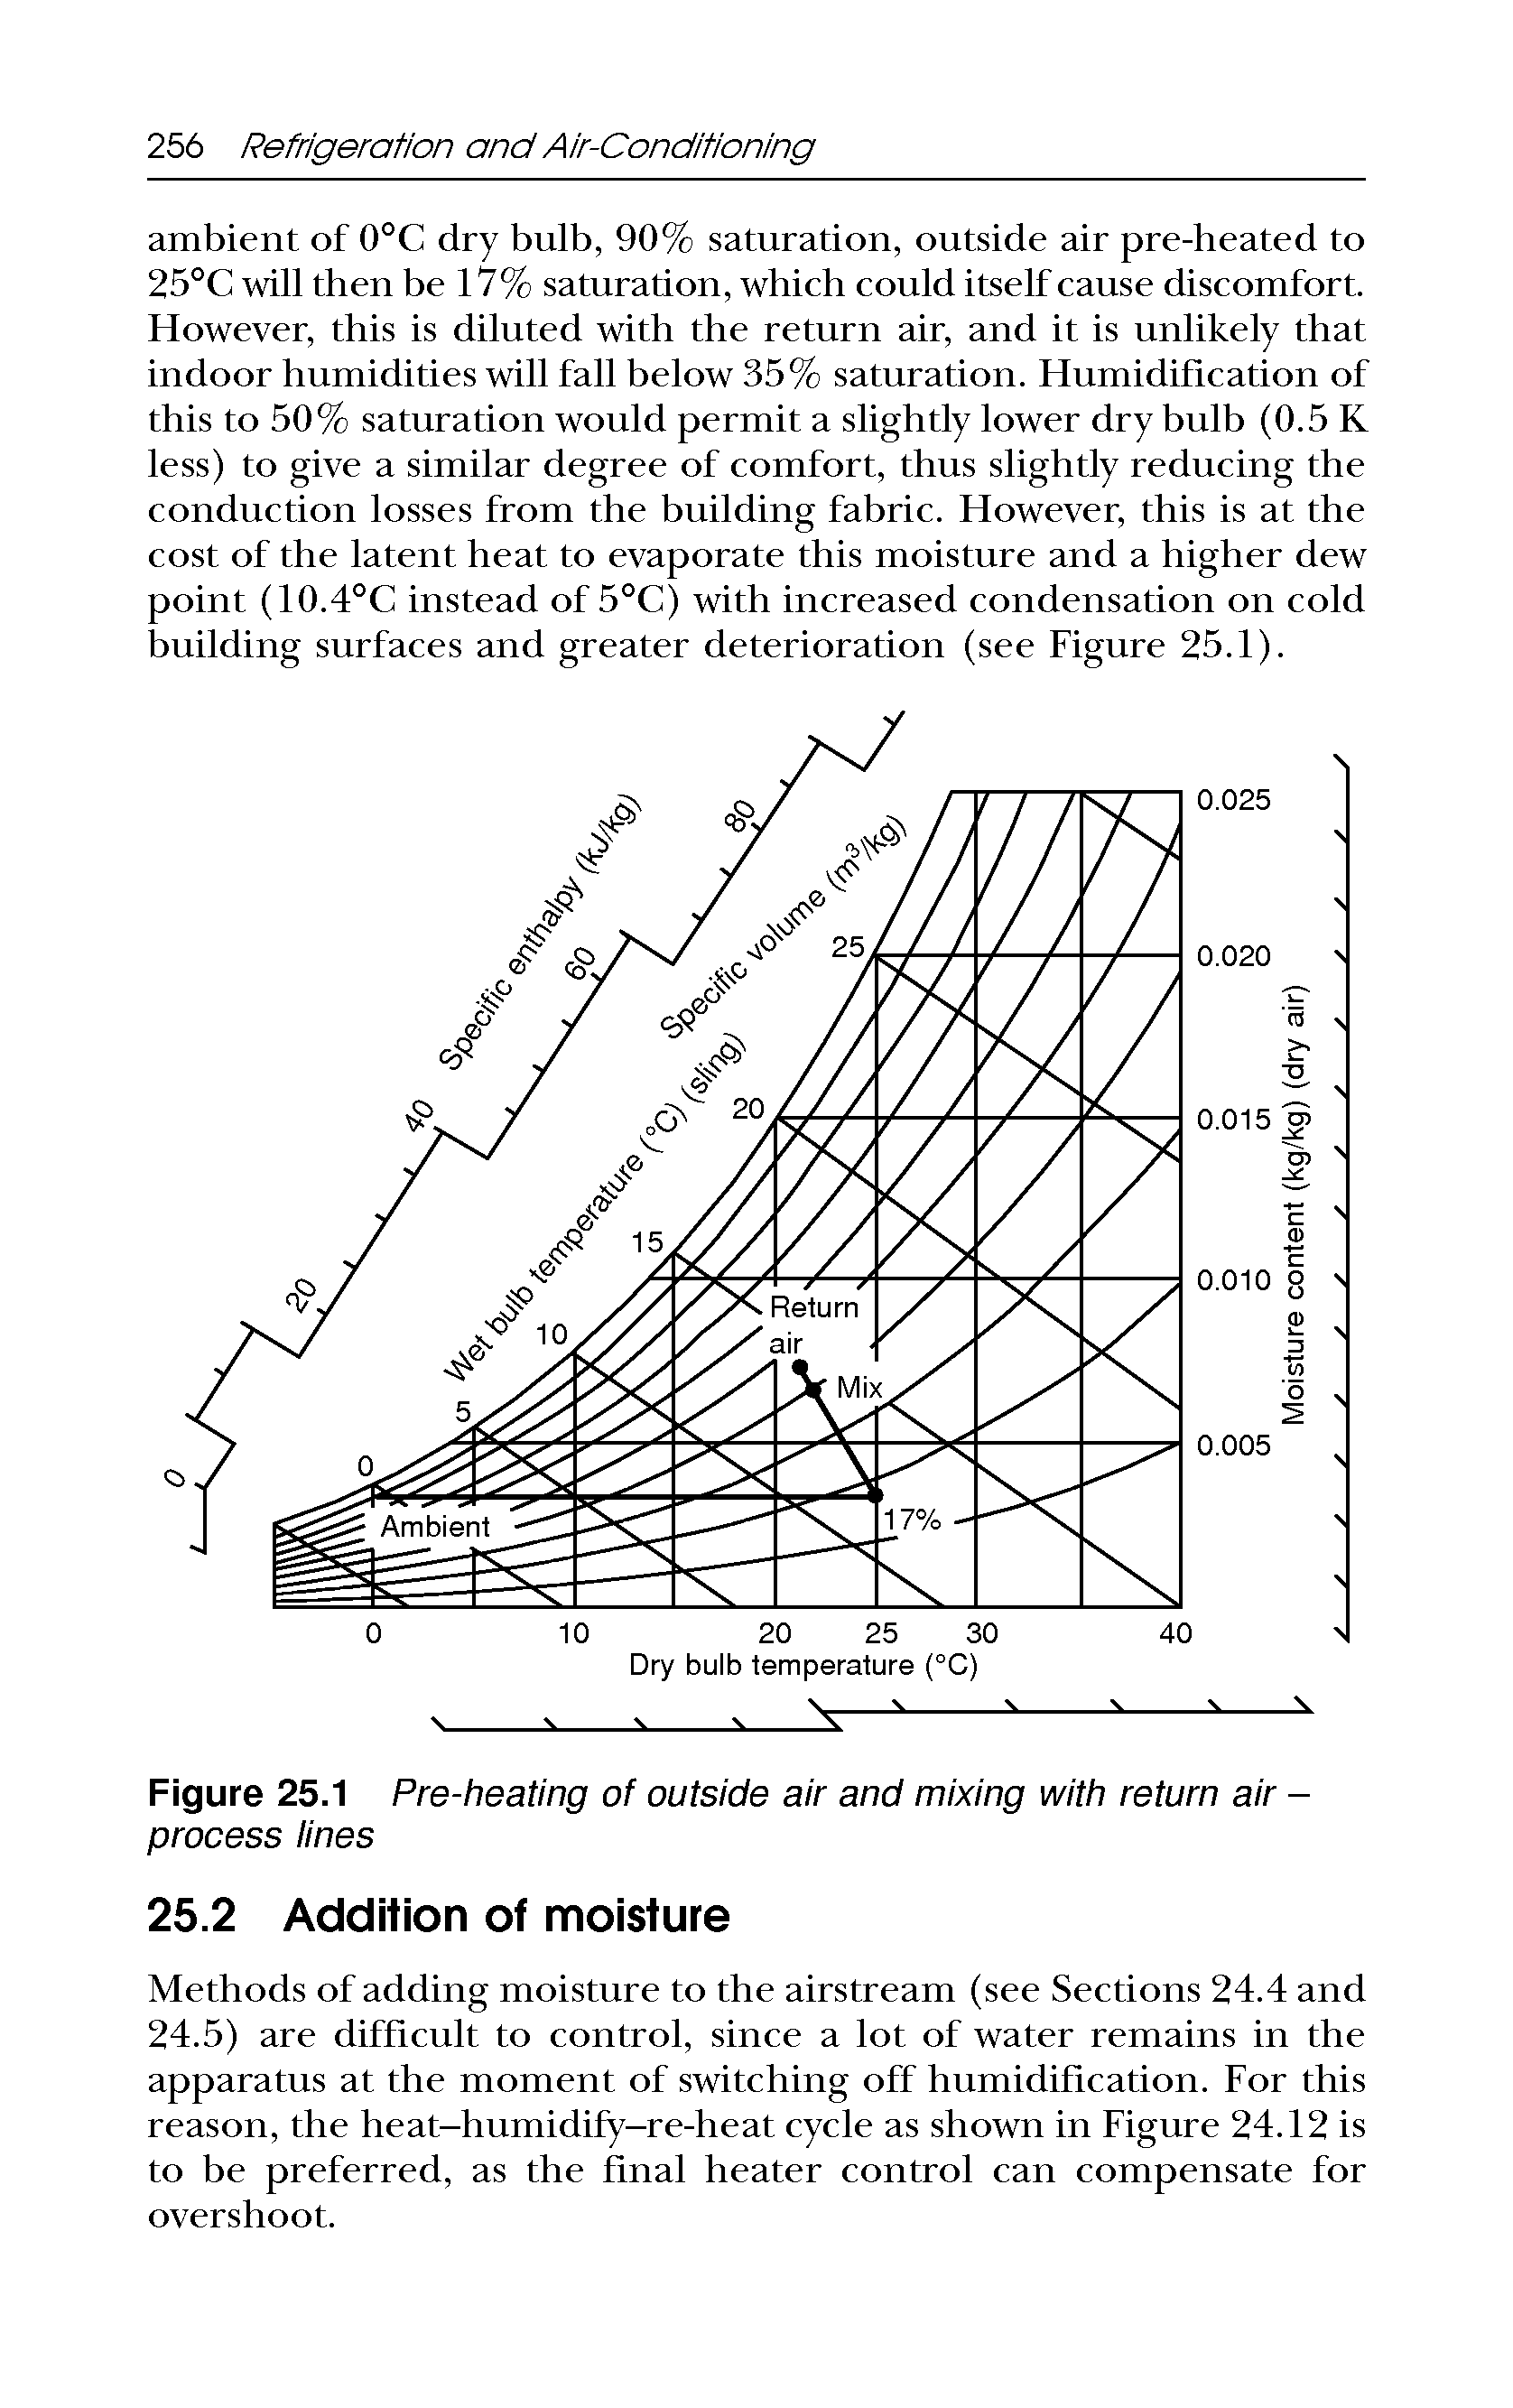 Figure 25.1 Pre-heating of outside air and mixing with return air -process iines...